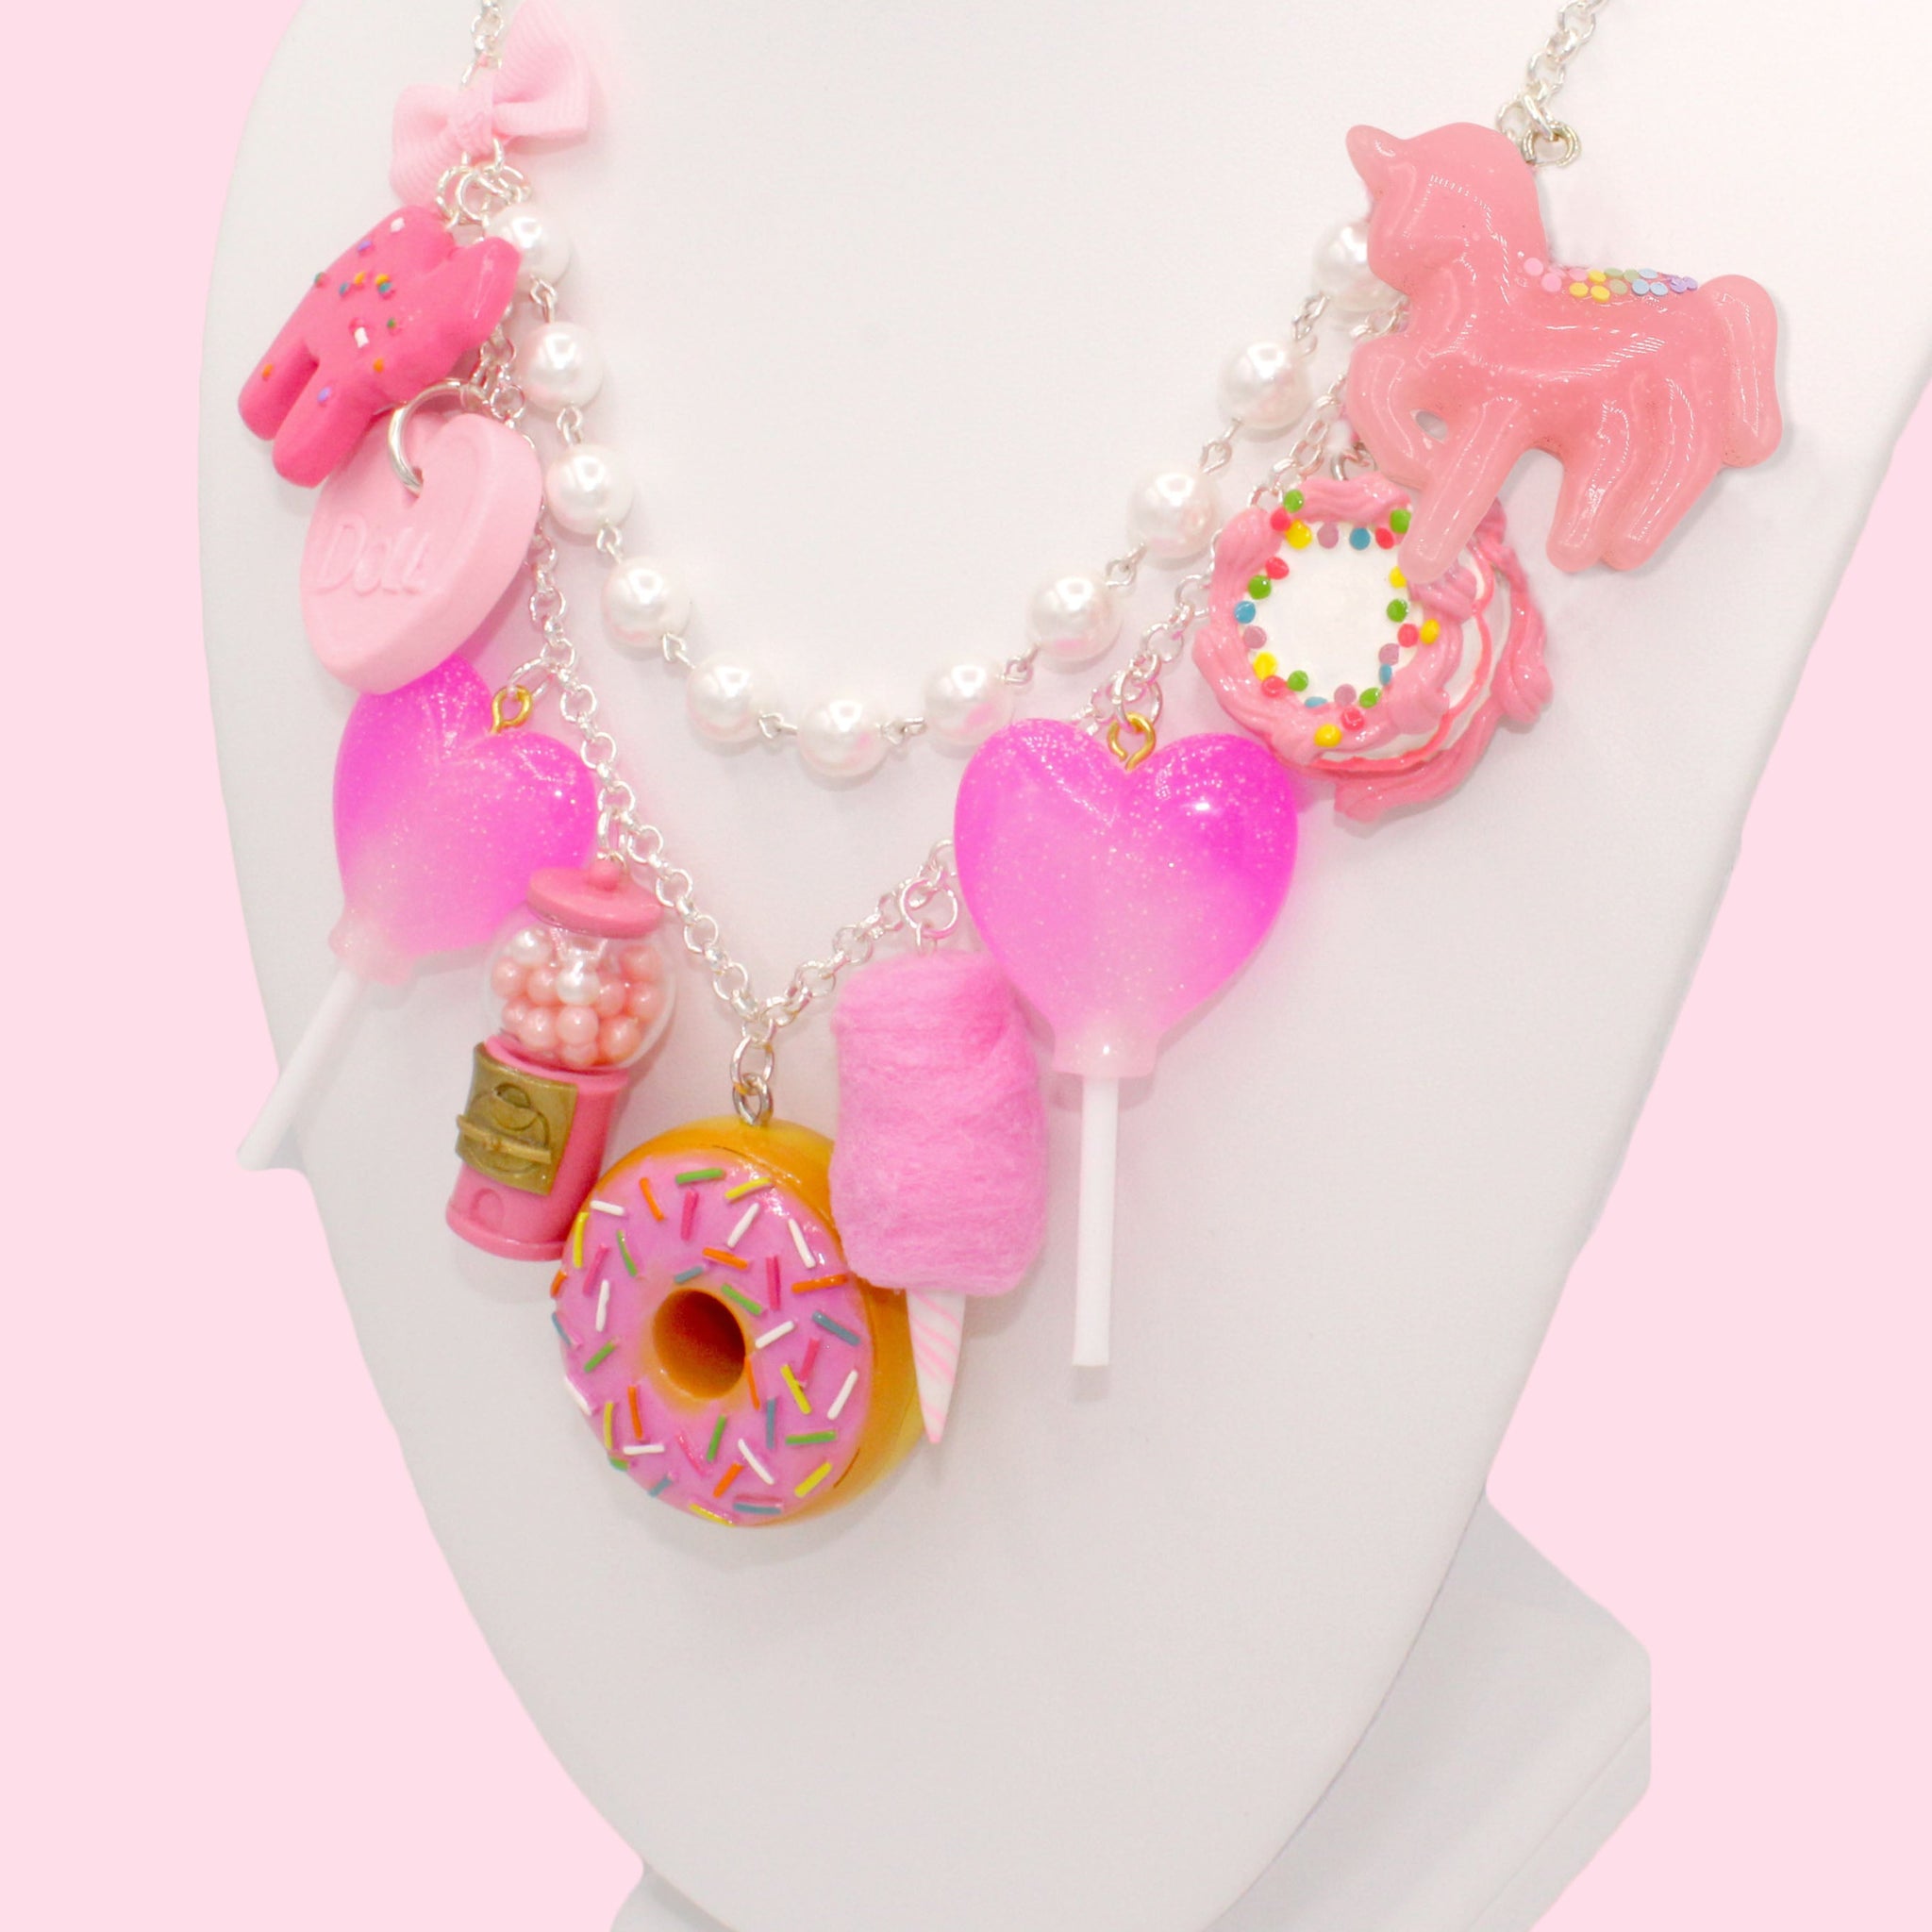 Hot Pink Squash Blossom Necklace